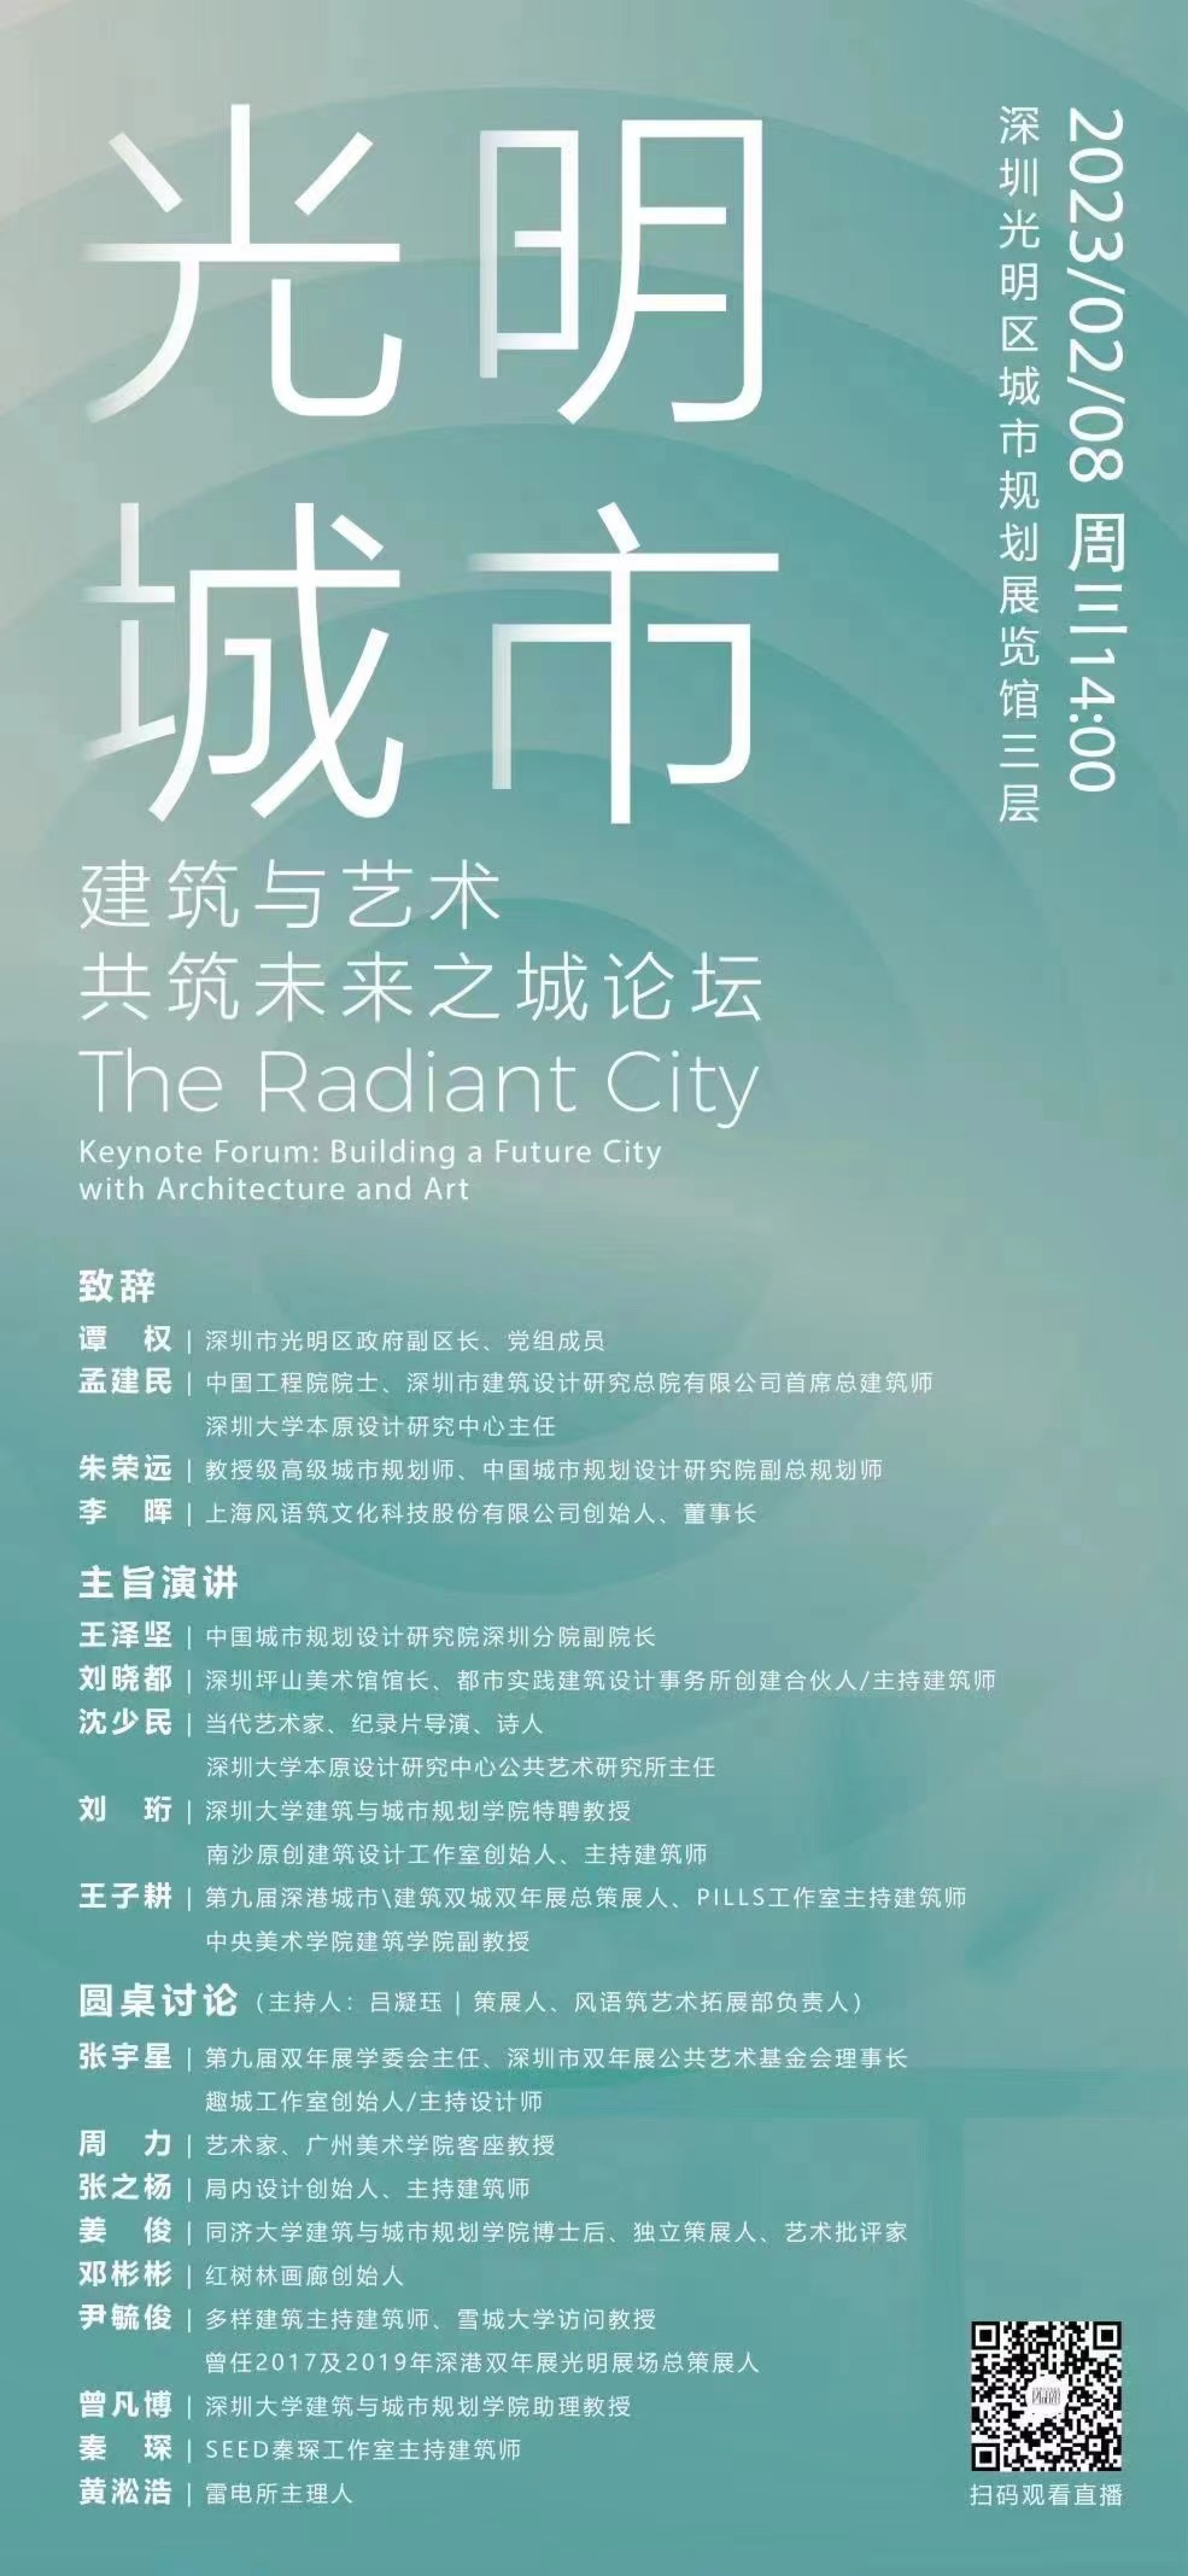 Zigeng Wang was Invited to Attend the Forum “The Radiant City | Building a Future City with Architecture and Arts” and Delivered a Speech Title “Given Topics on Exhibition, Discourse, and Publicness”